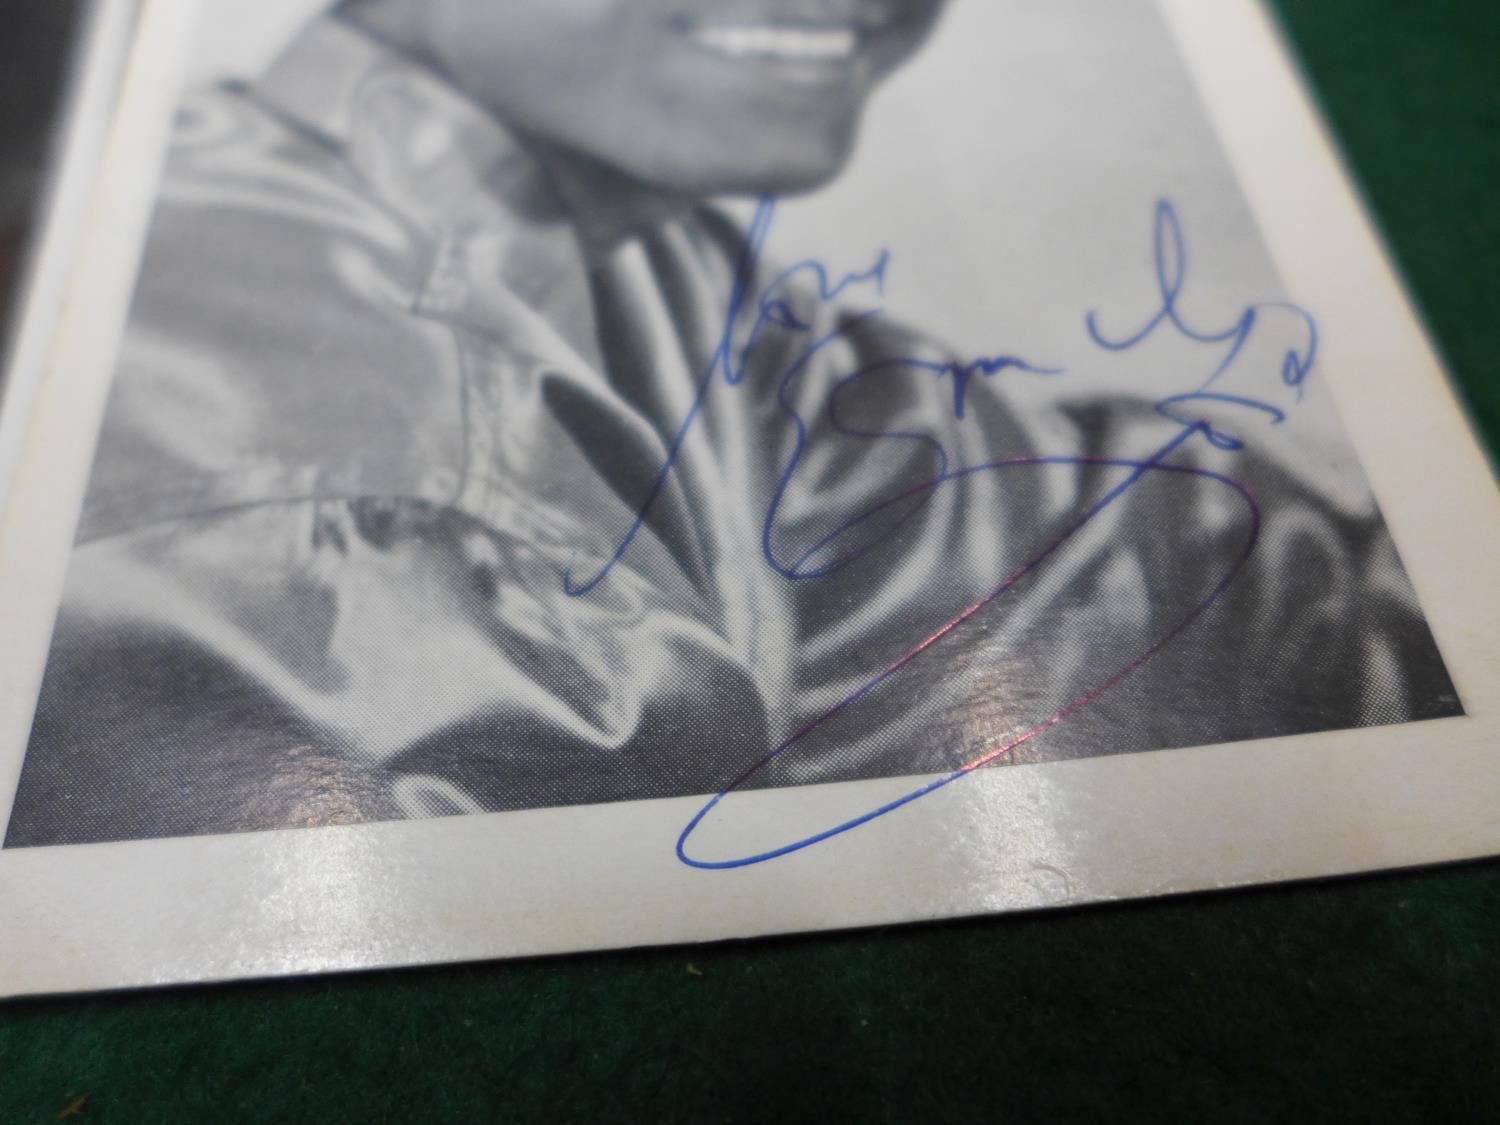 A SIGNED JIMMY YOUNG PHOTOGRAPH, SIGNED EMILE FORD POSTCARD AND A CREW CUTS POSTCARD - Image 3 of 5